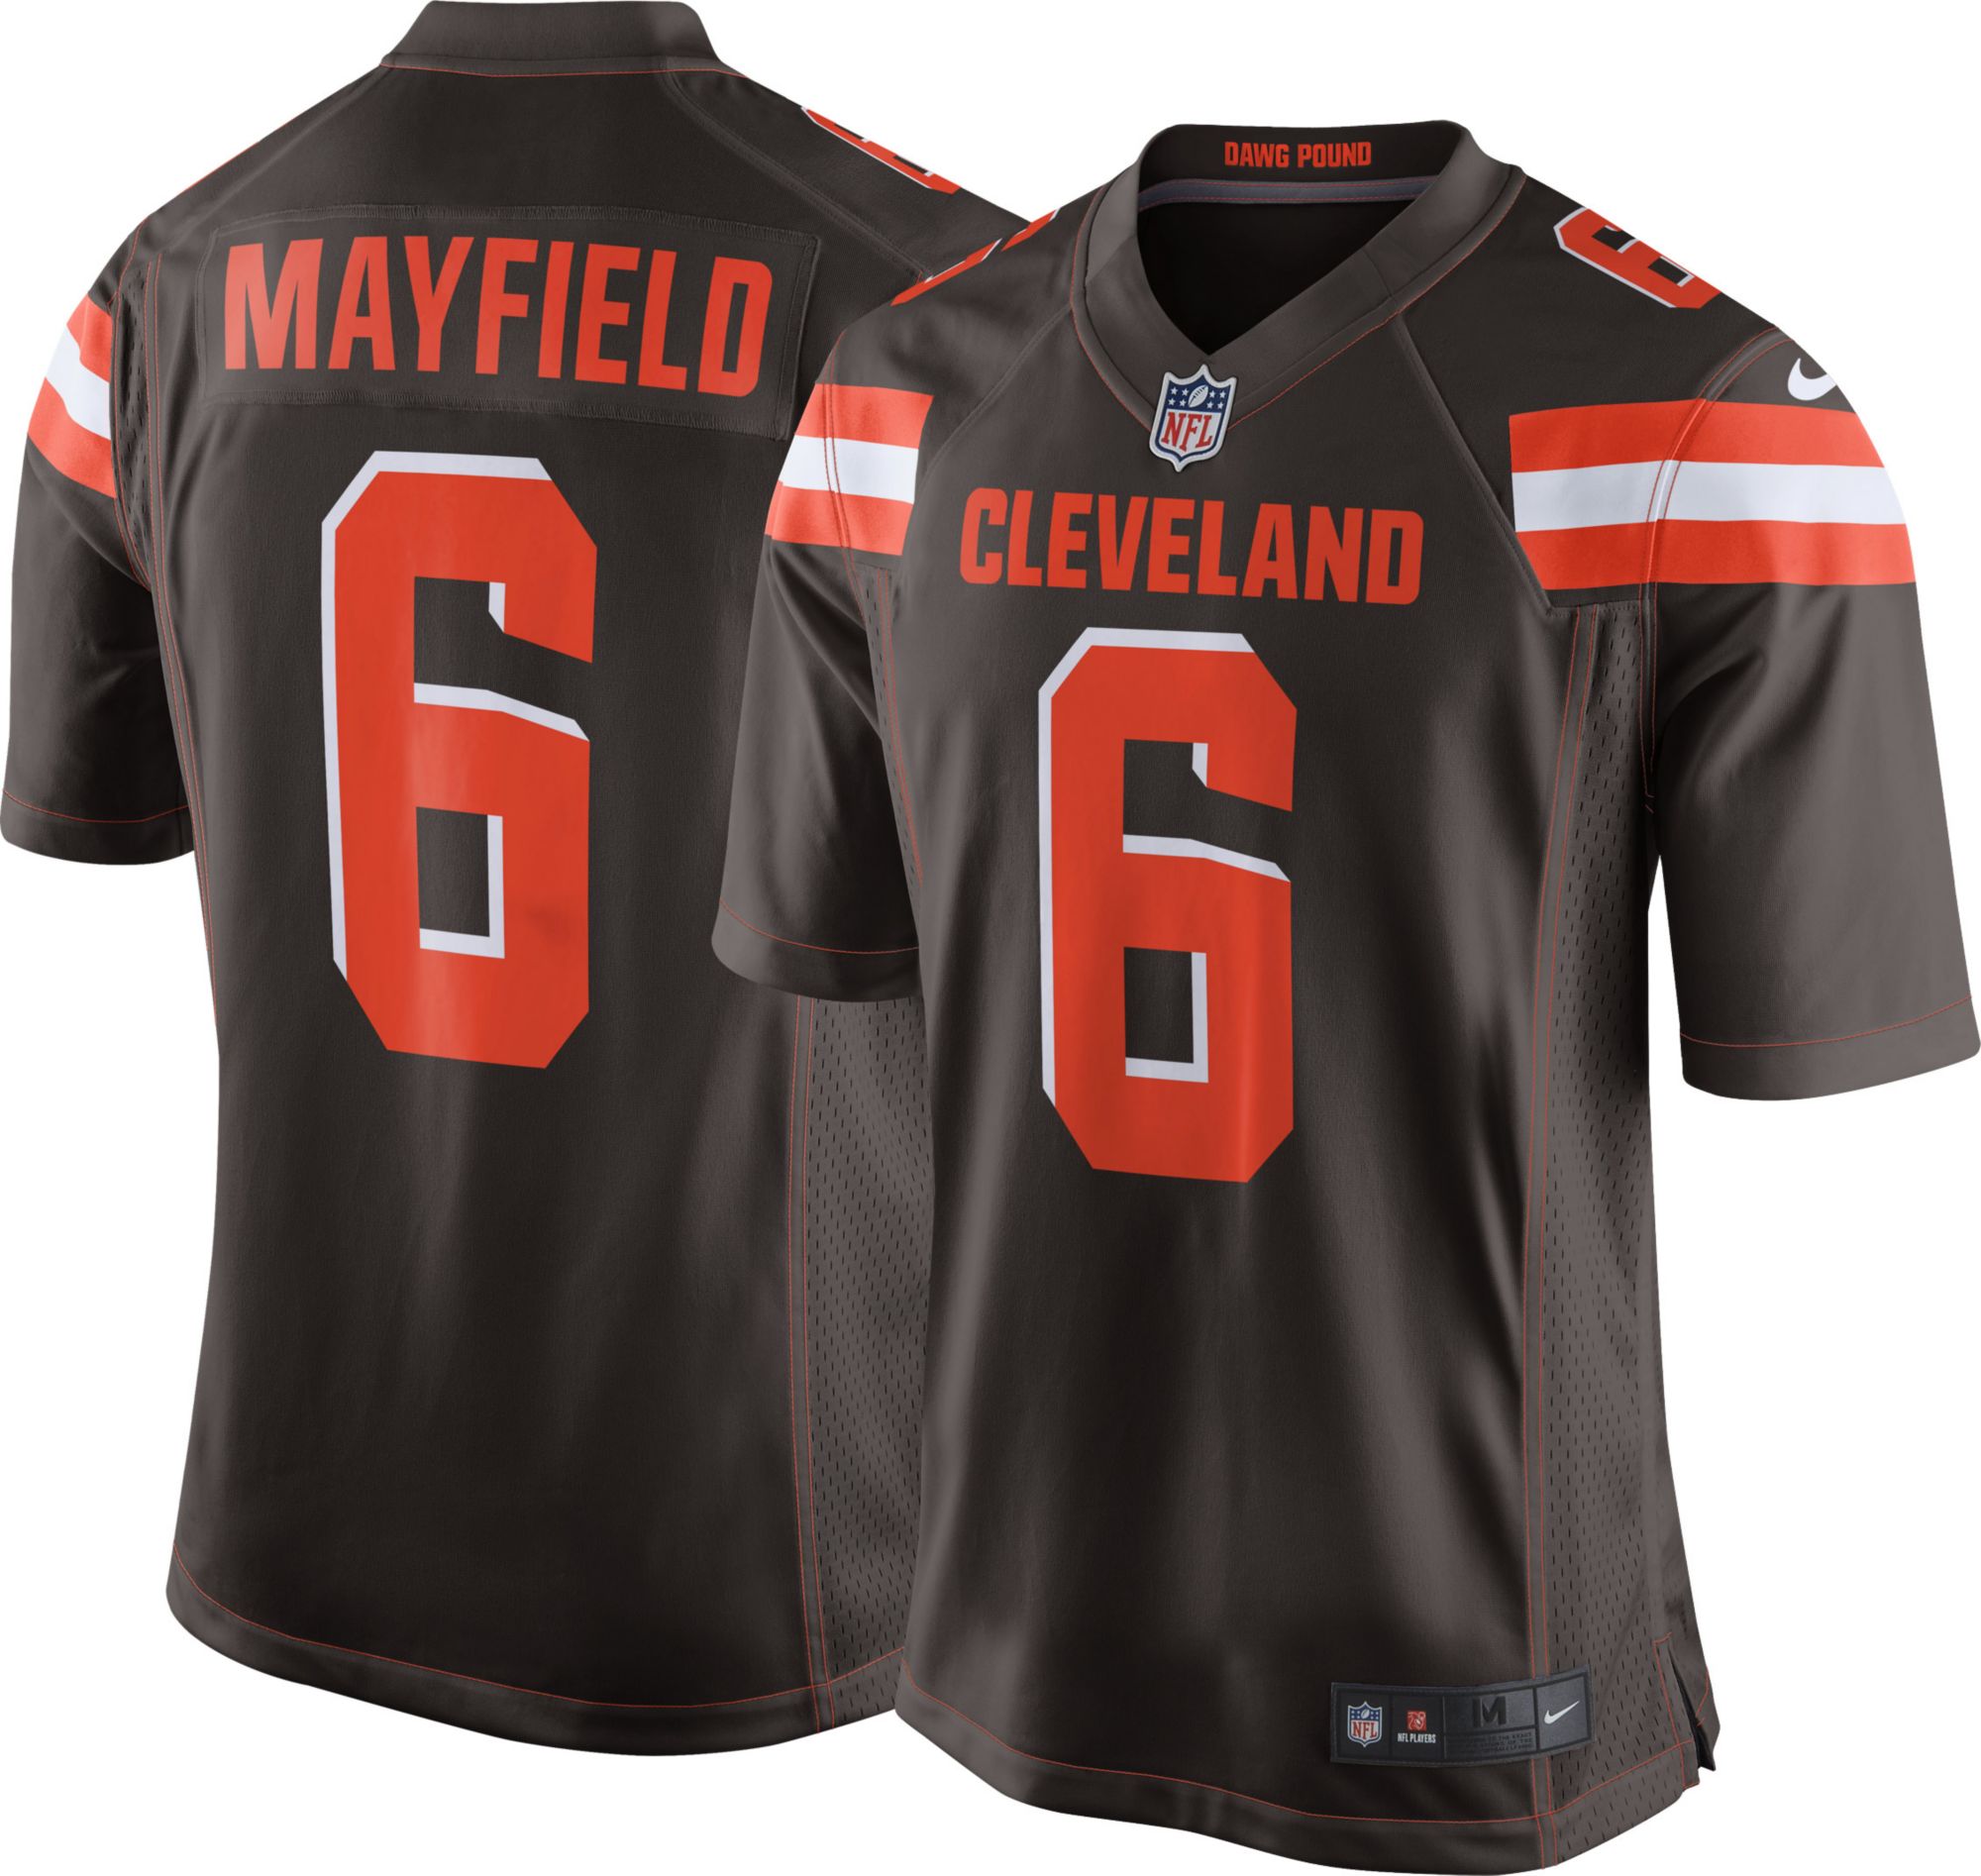 baker mayfield signed jersey for sale